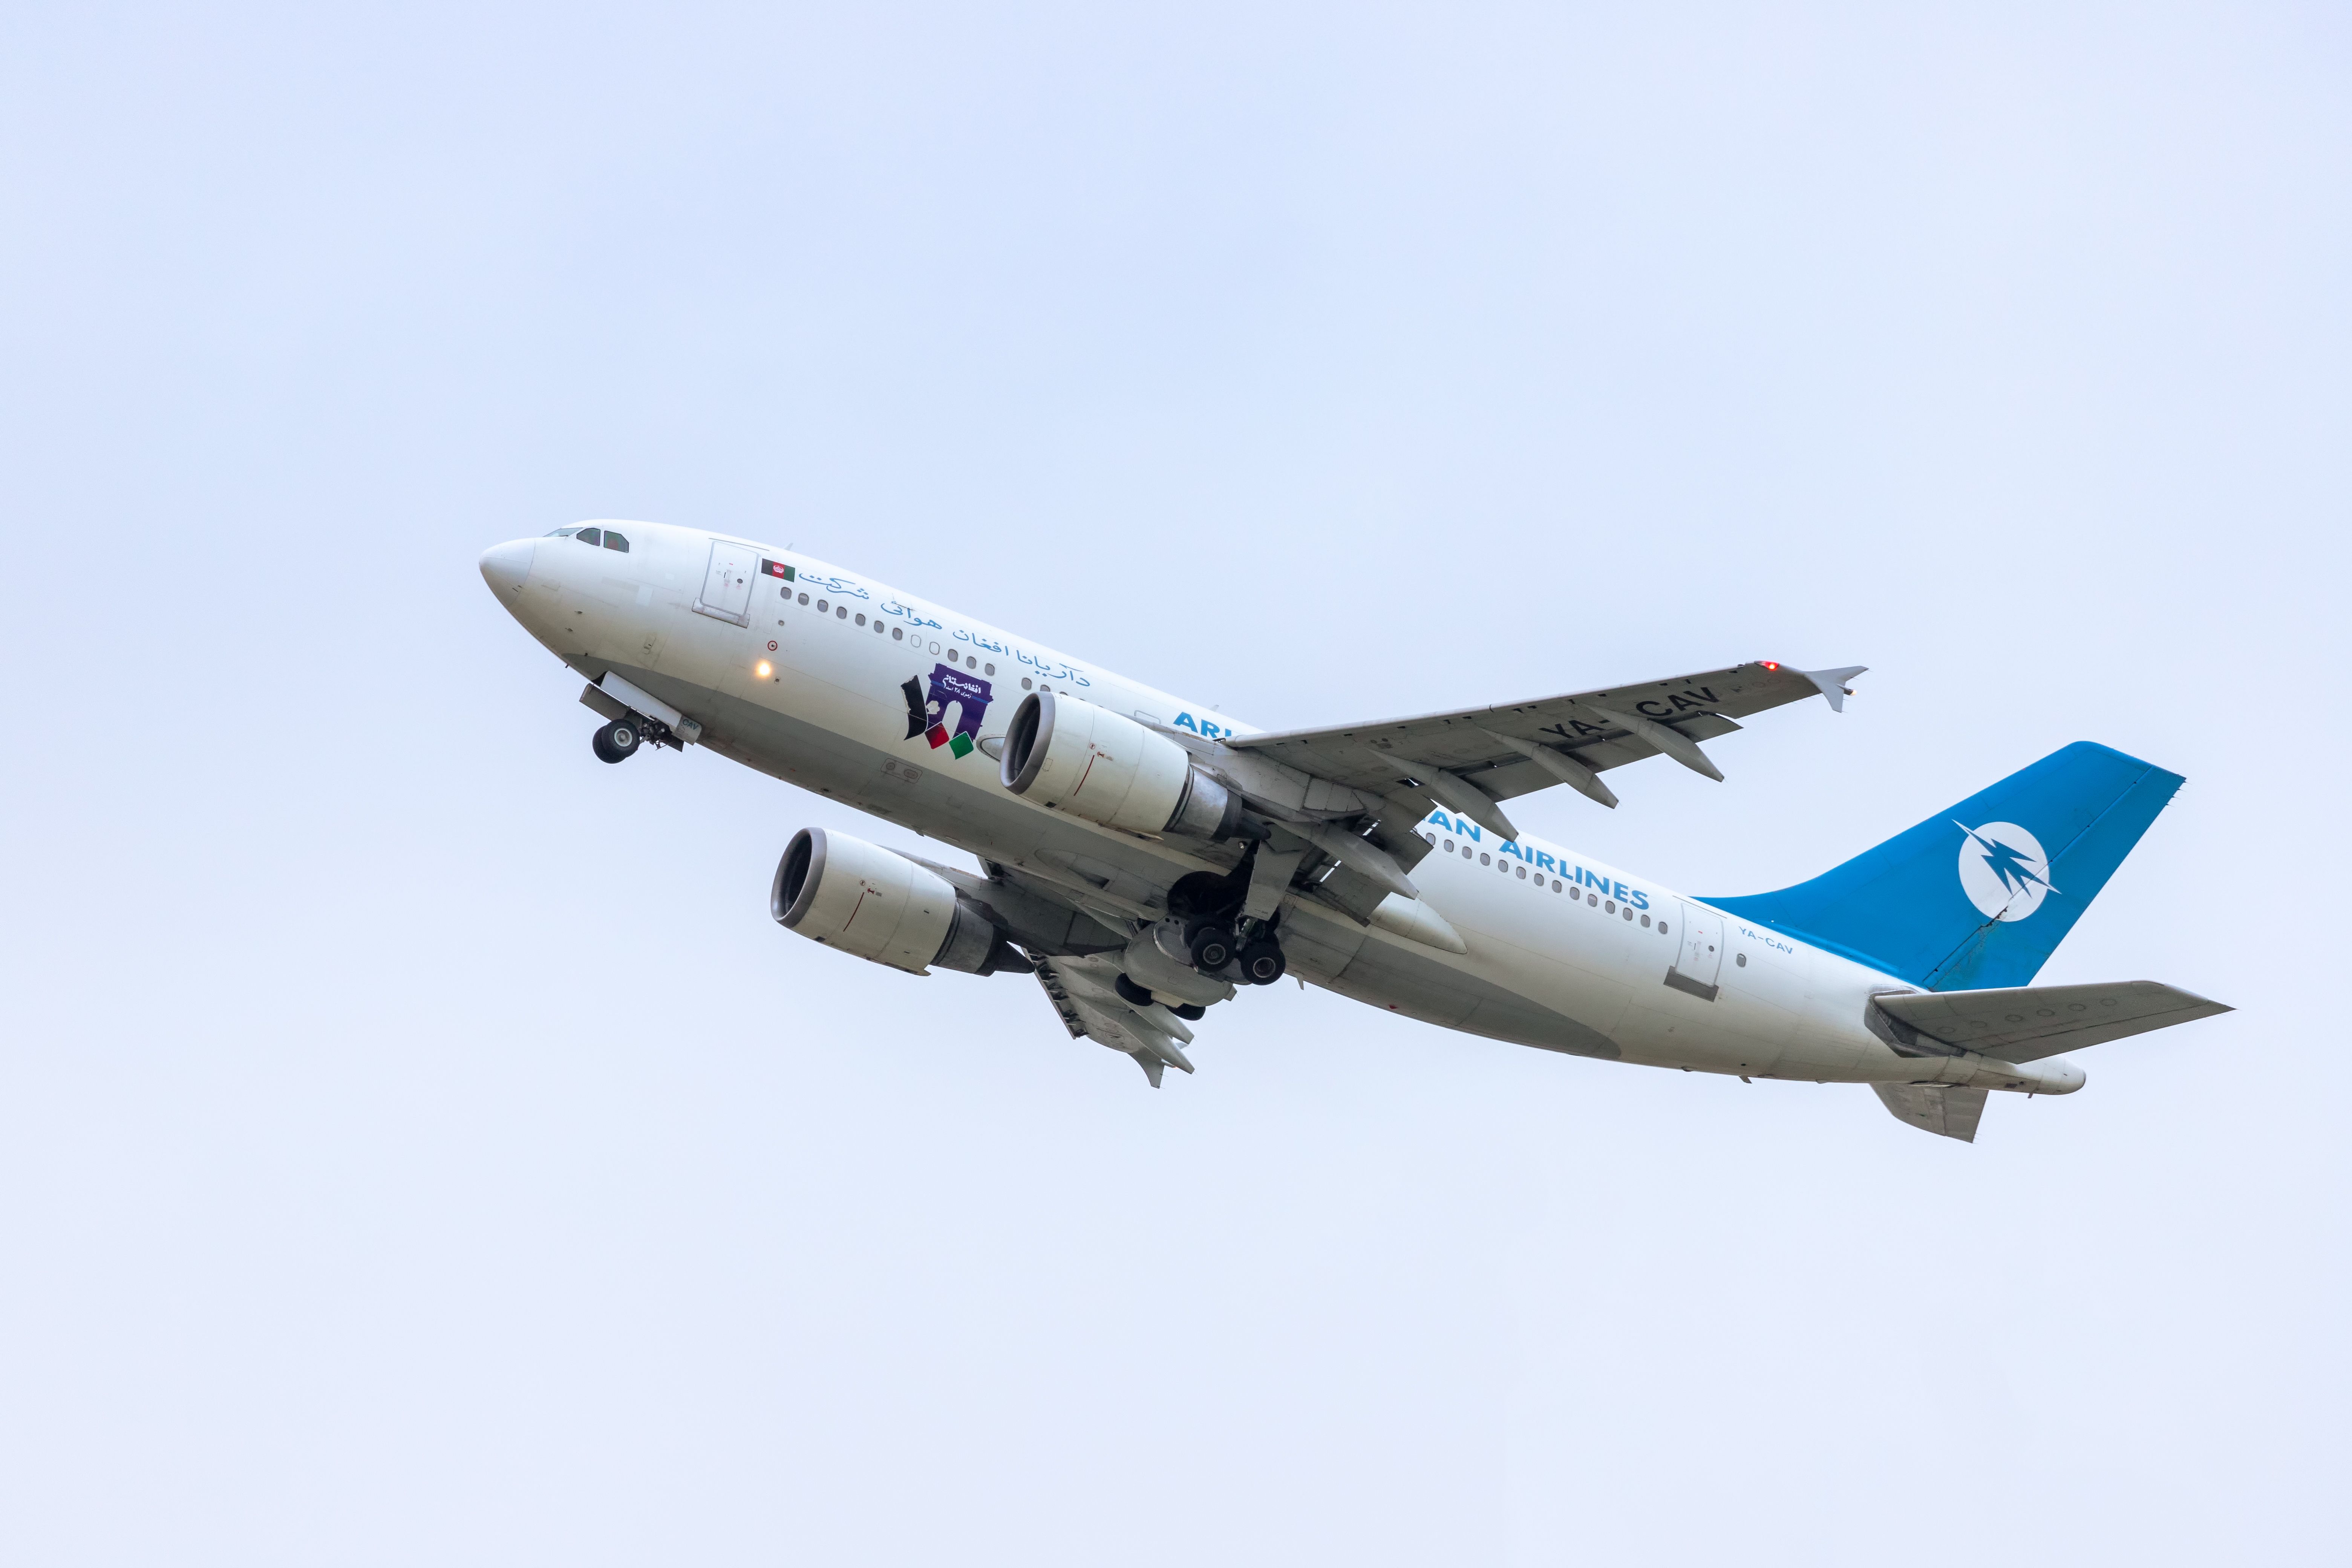 An Ariana Afghan Airlines Airbus A310-300 flying in the sky.